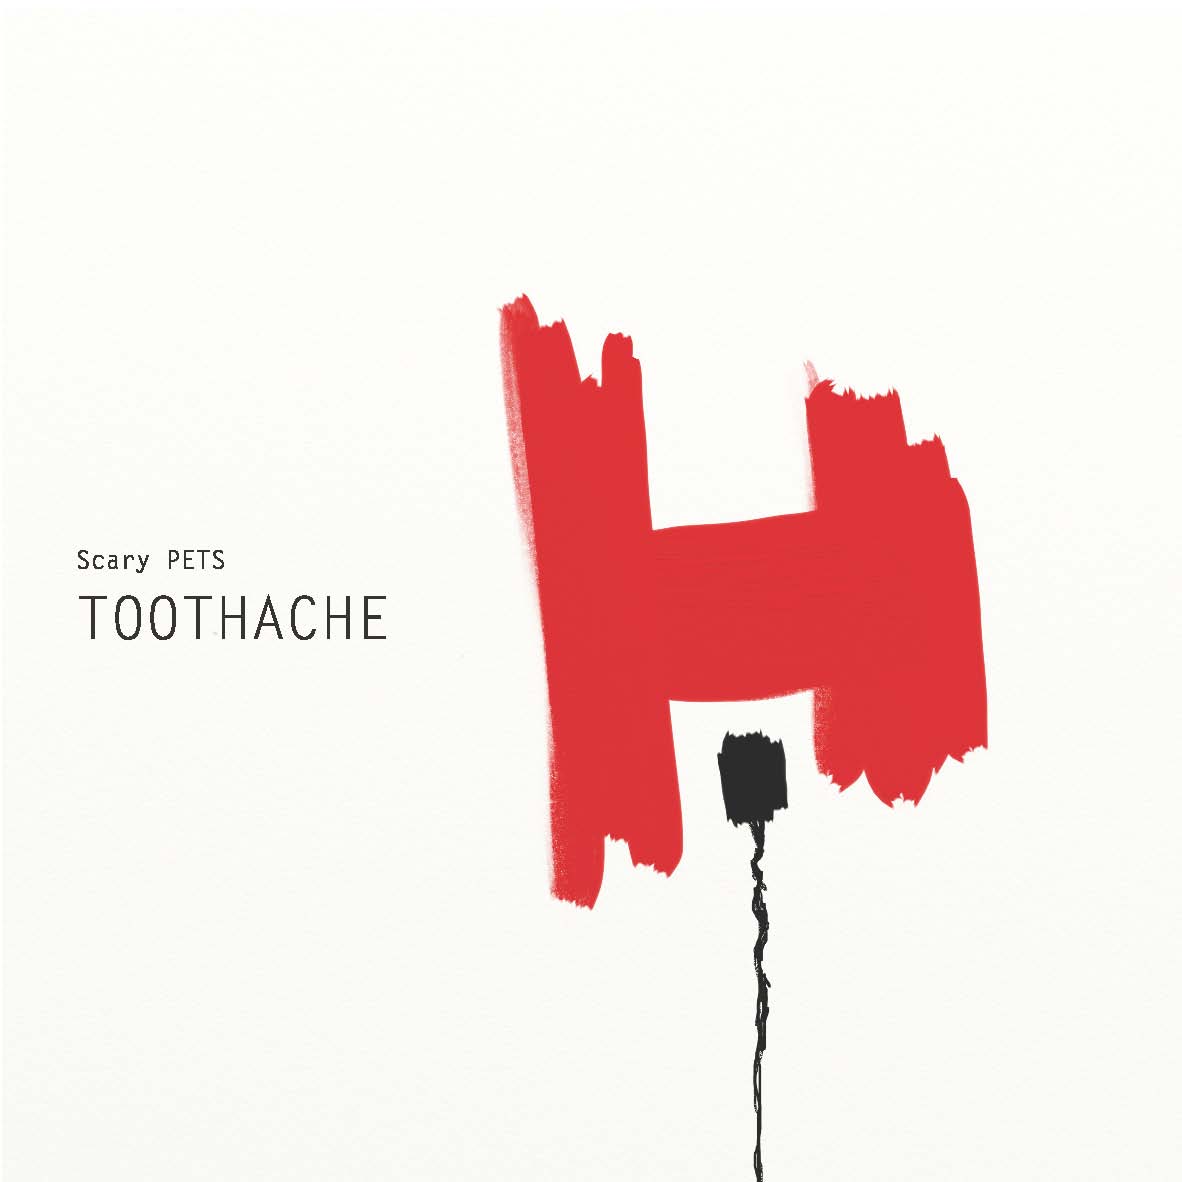 ScaryPETS TOOTHACHE cover